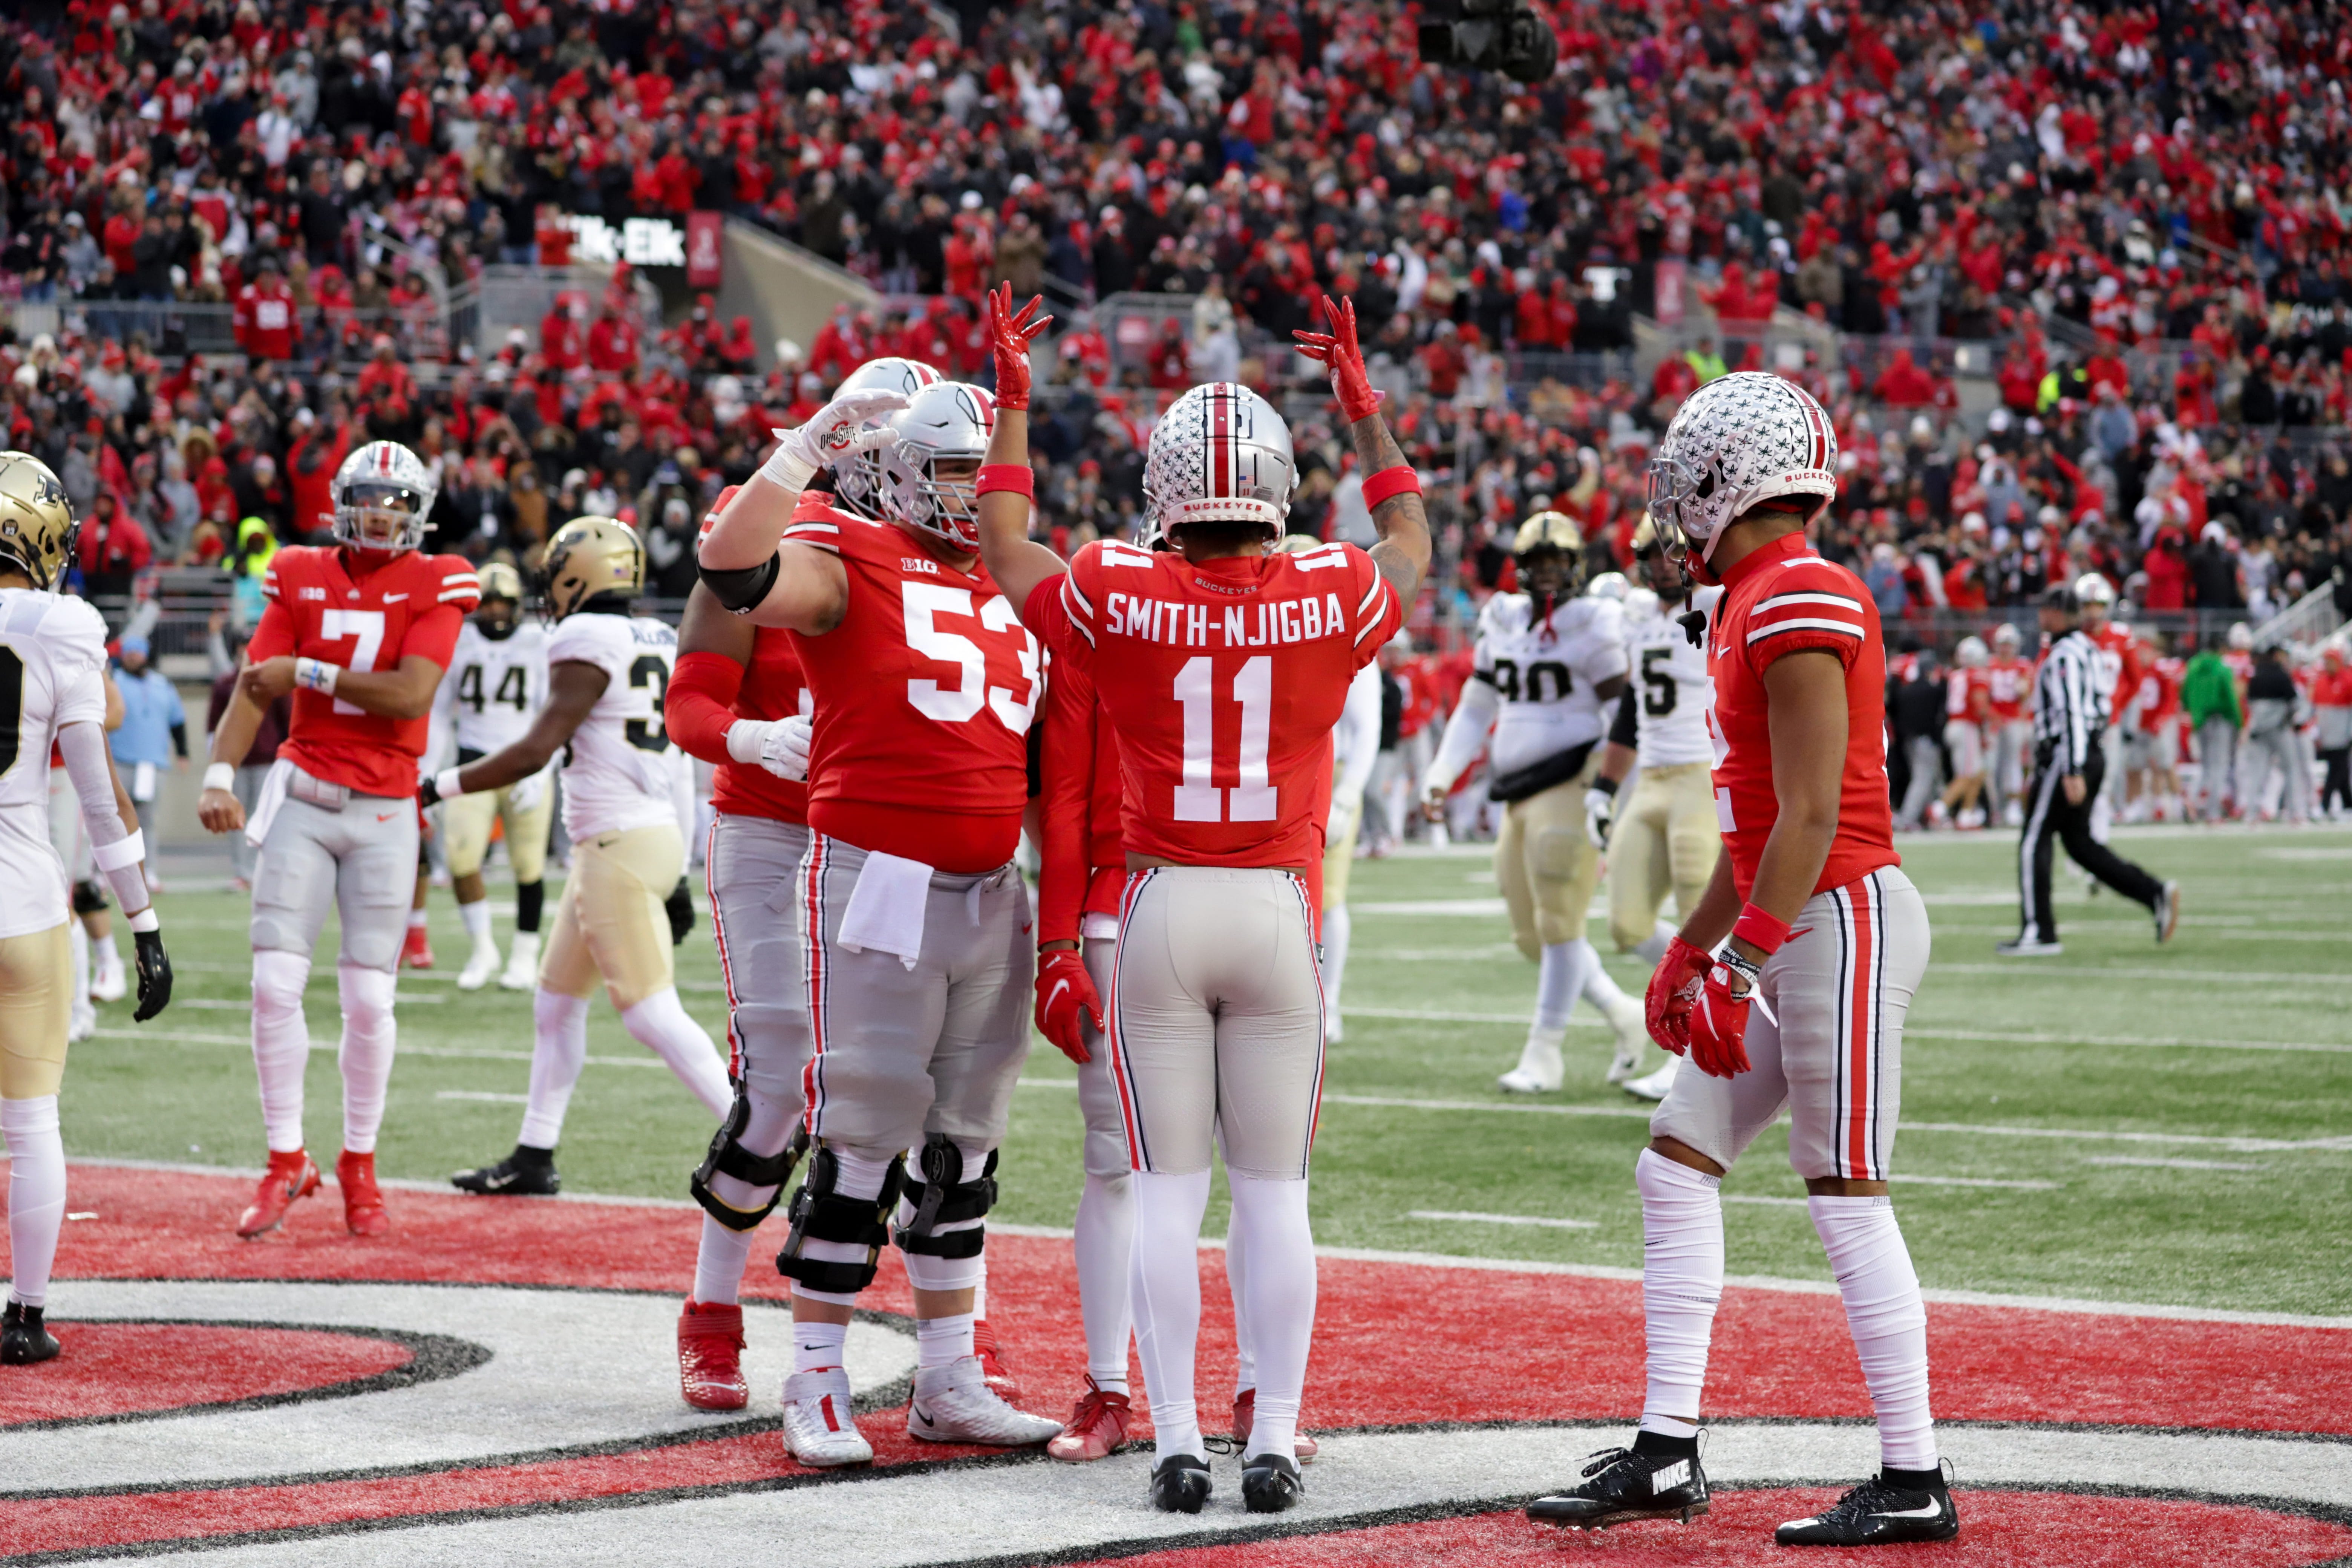 Football: No. 4 Ohio State hosts No. 7 Michigan State for a meeting with playoff implications